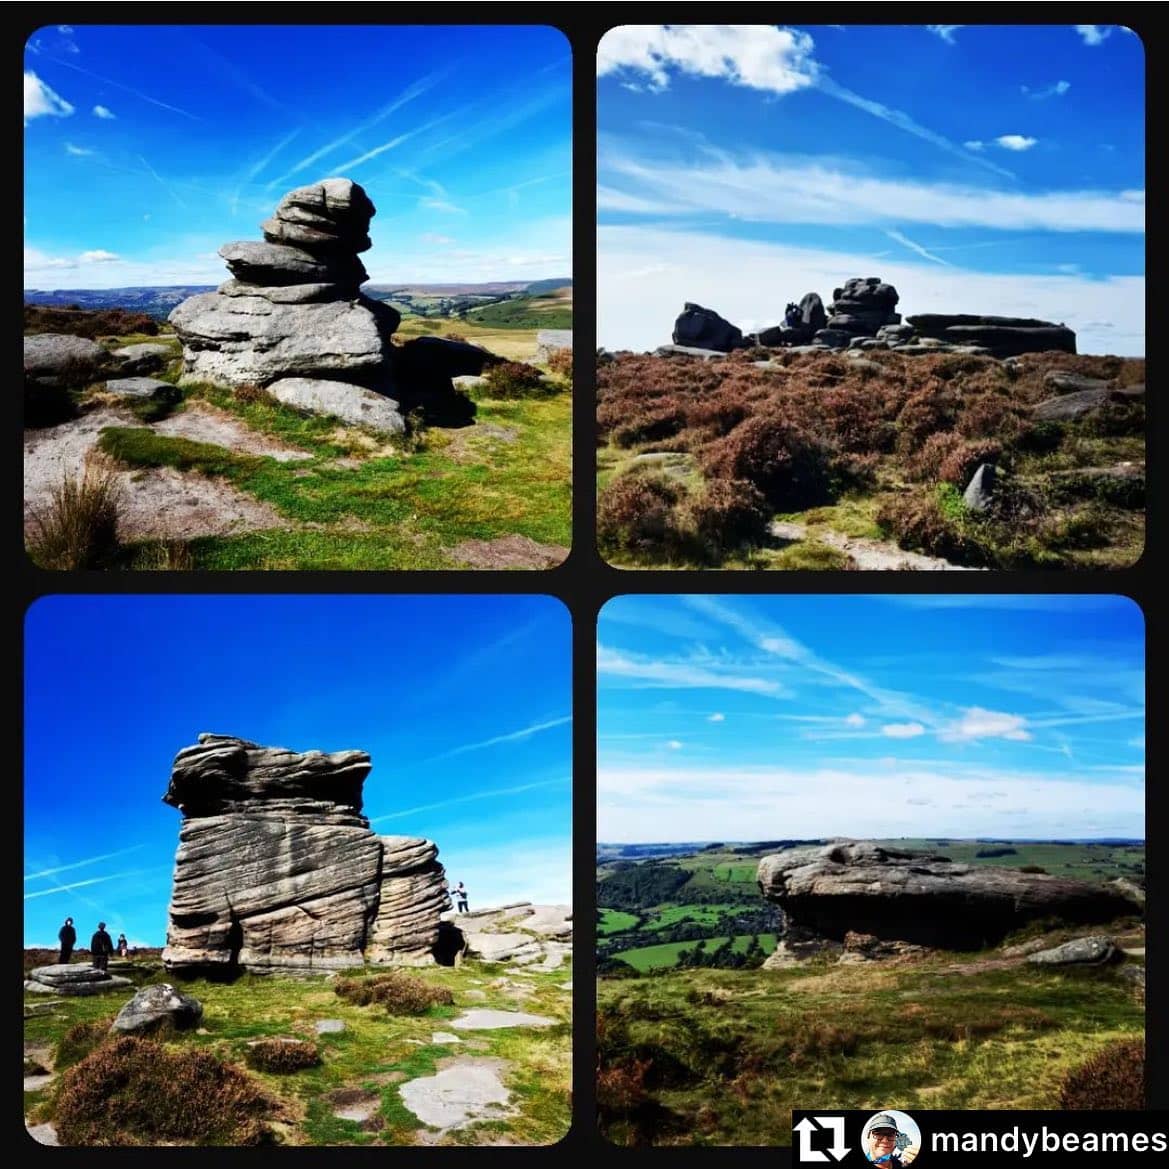 Repost from @mandybeames 

@peakdistrictchallenge yesterday, and what a day! This event had every...